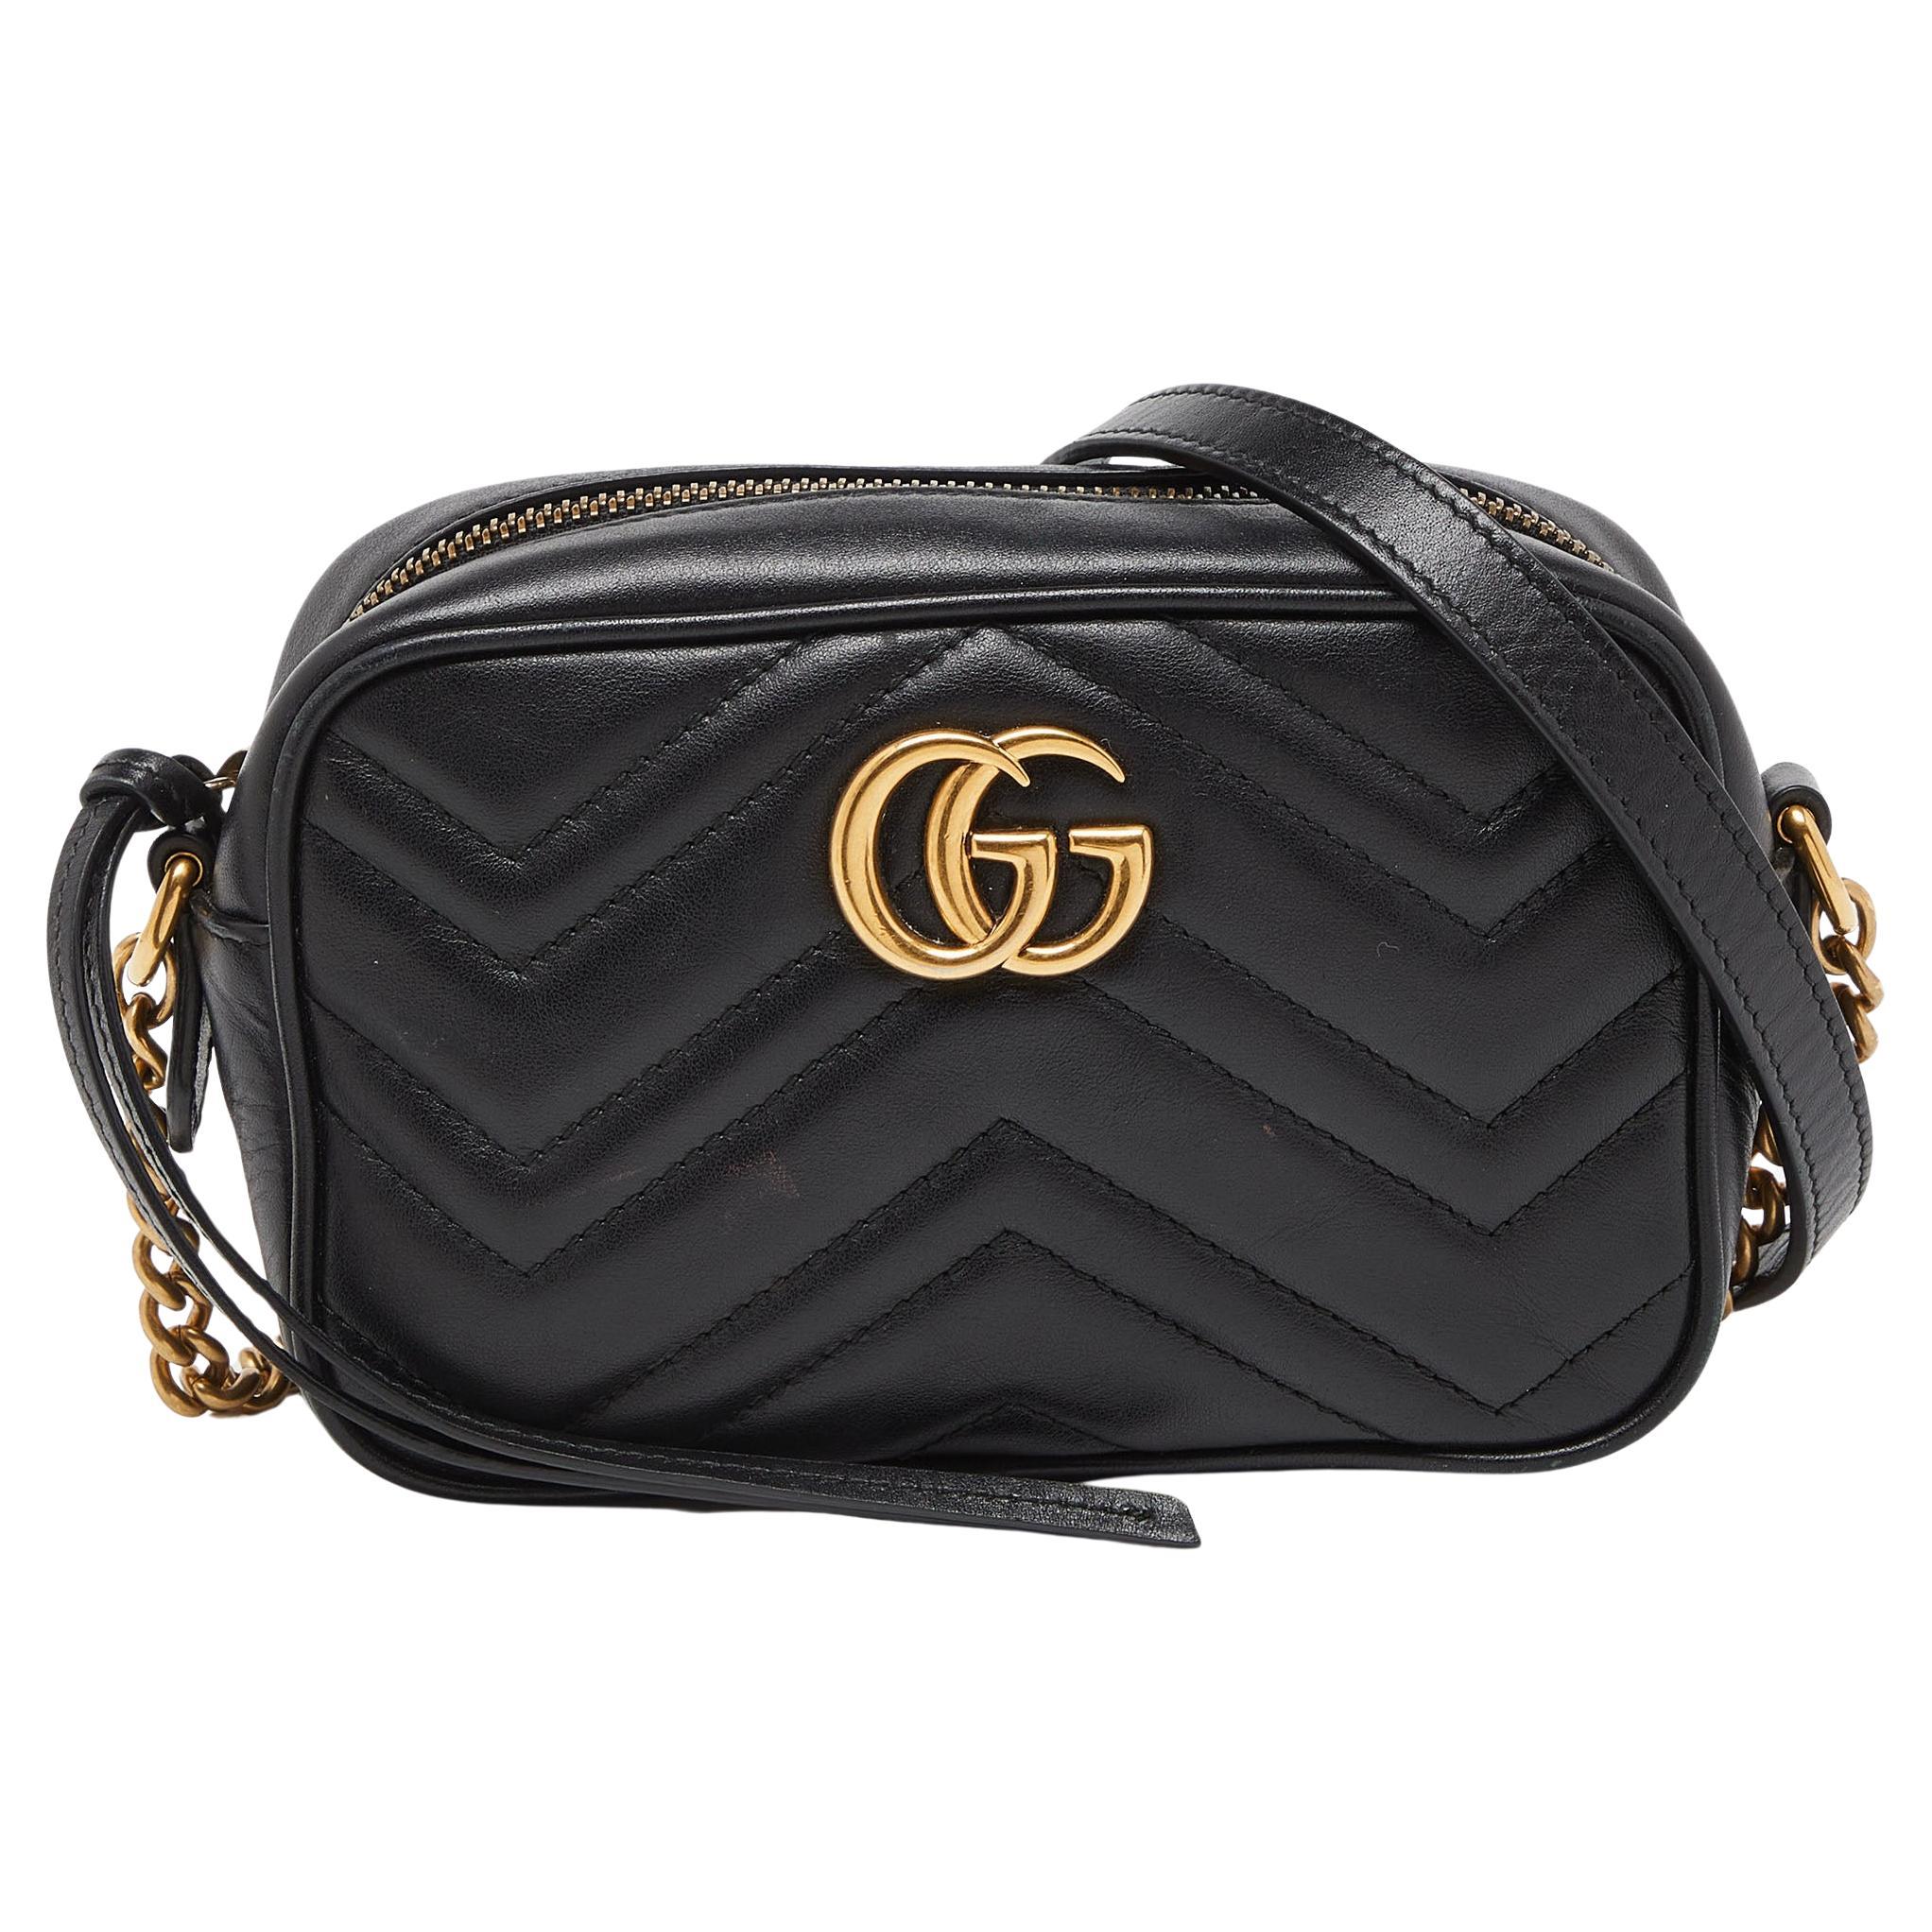 What size is the Gucci Camera bag?